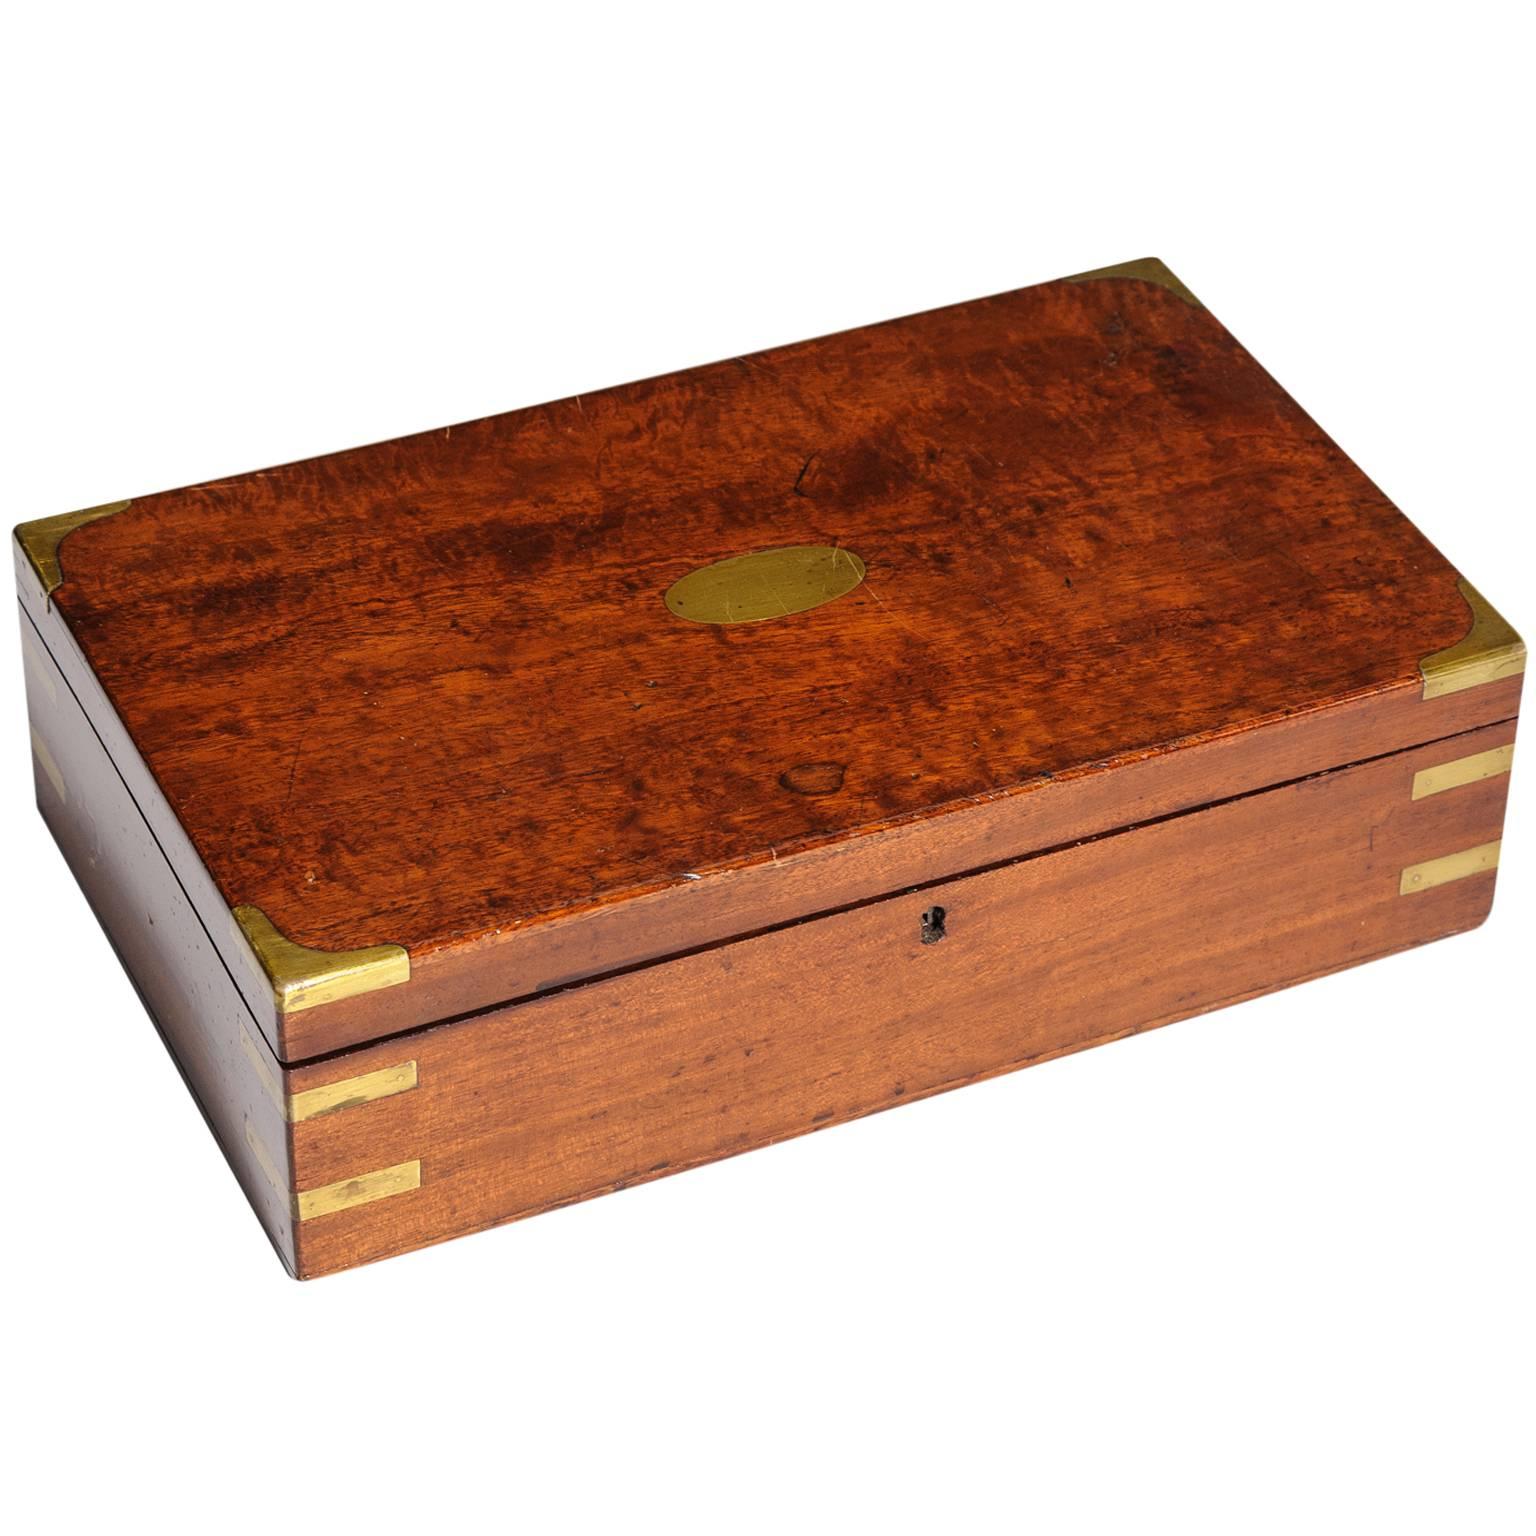 19th Century Officer's Campaign Work Box